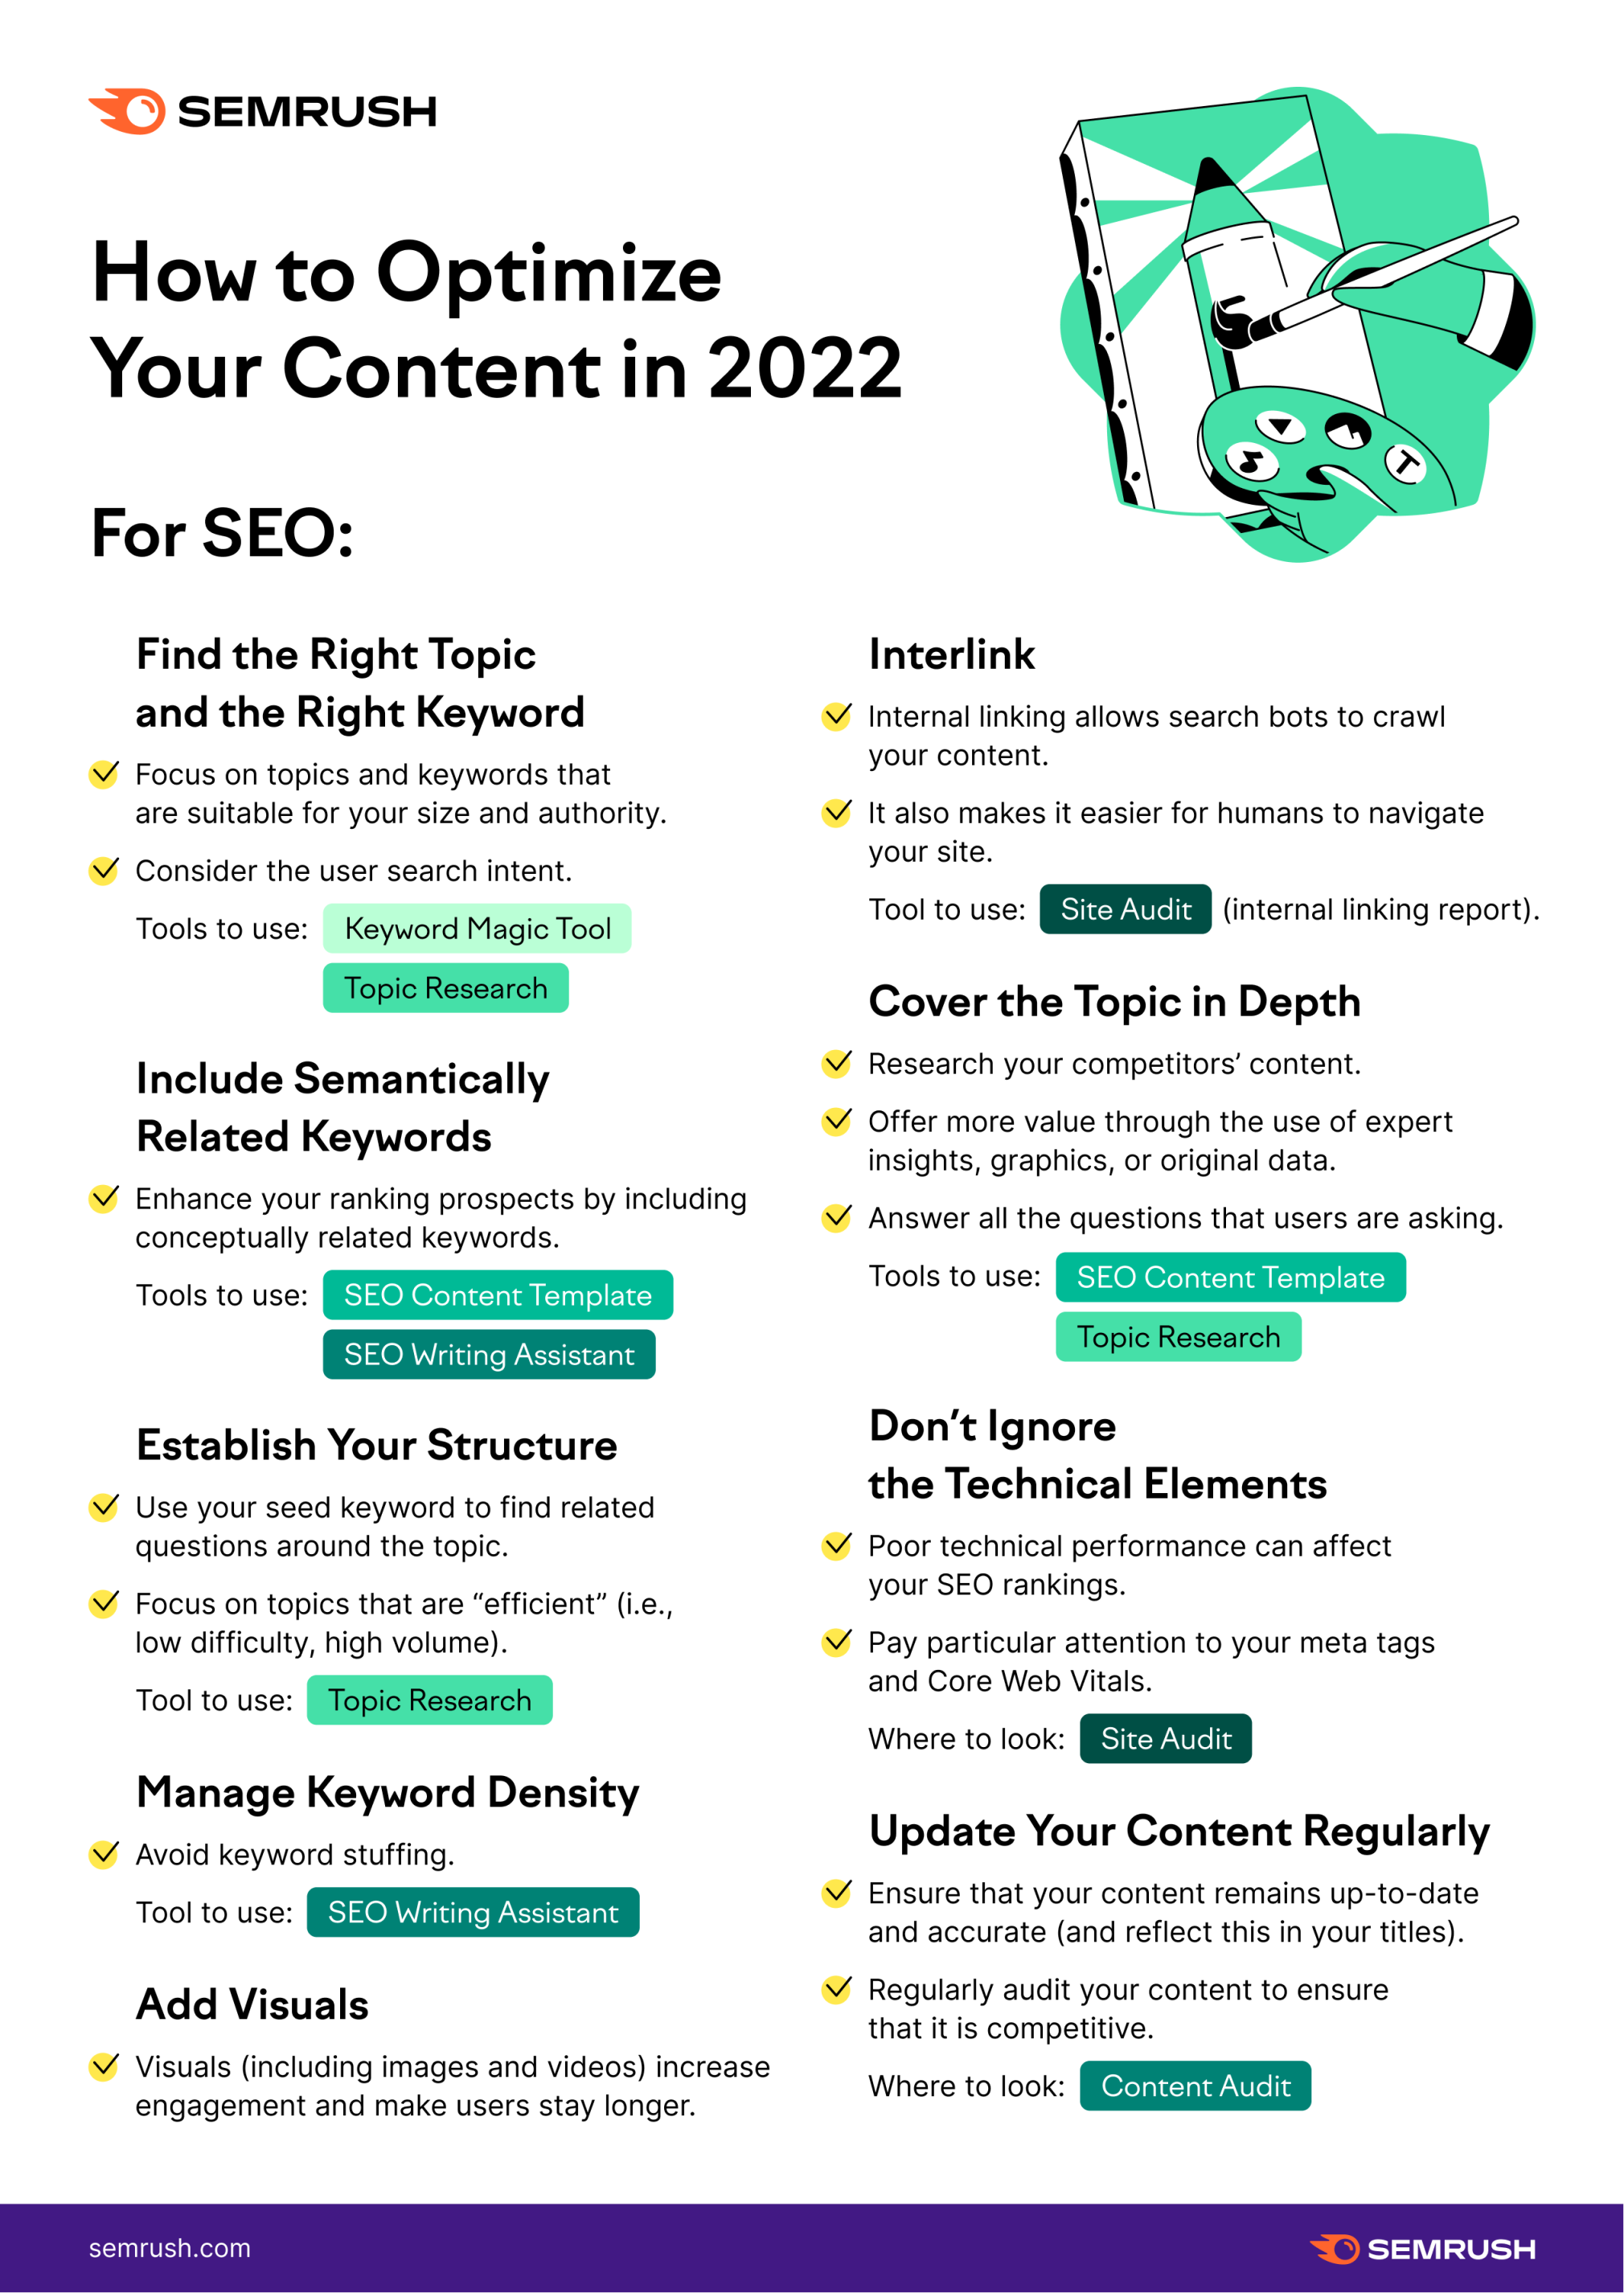 How to optimize content for SEO